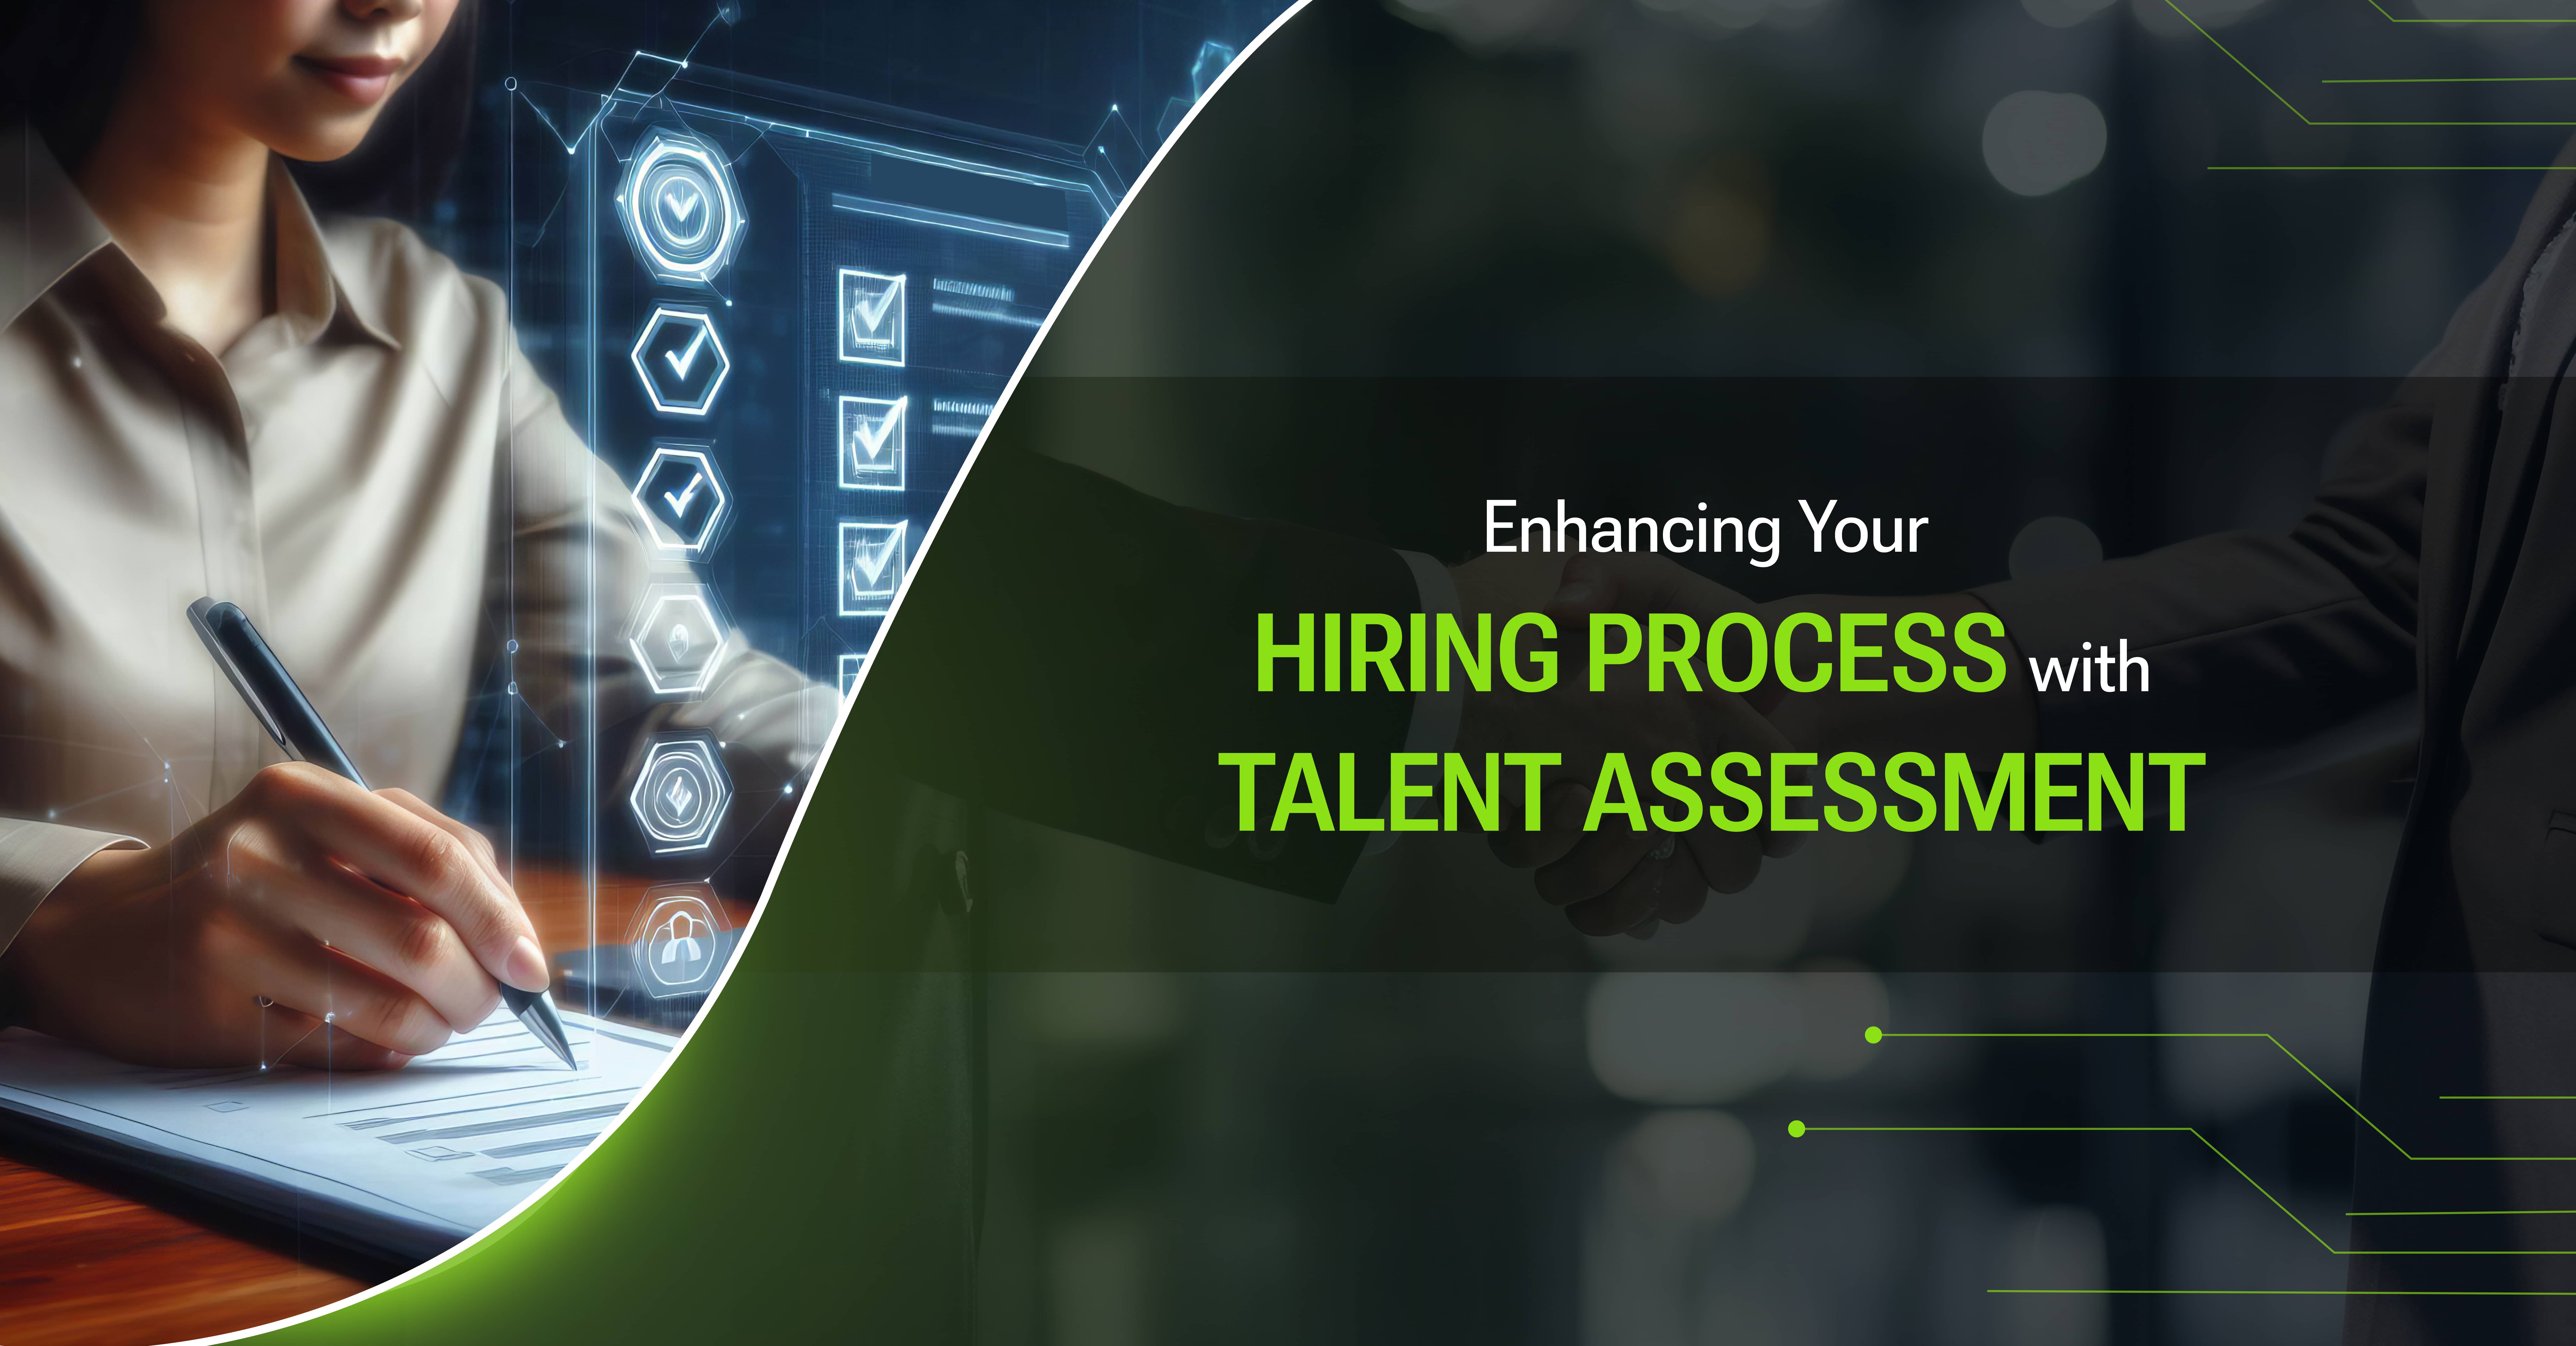 Enhancing Your Hiring Process with Talent Assessment